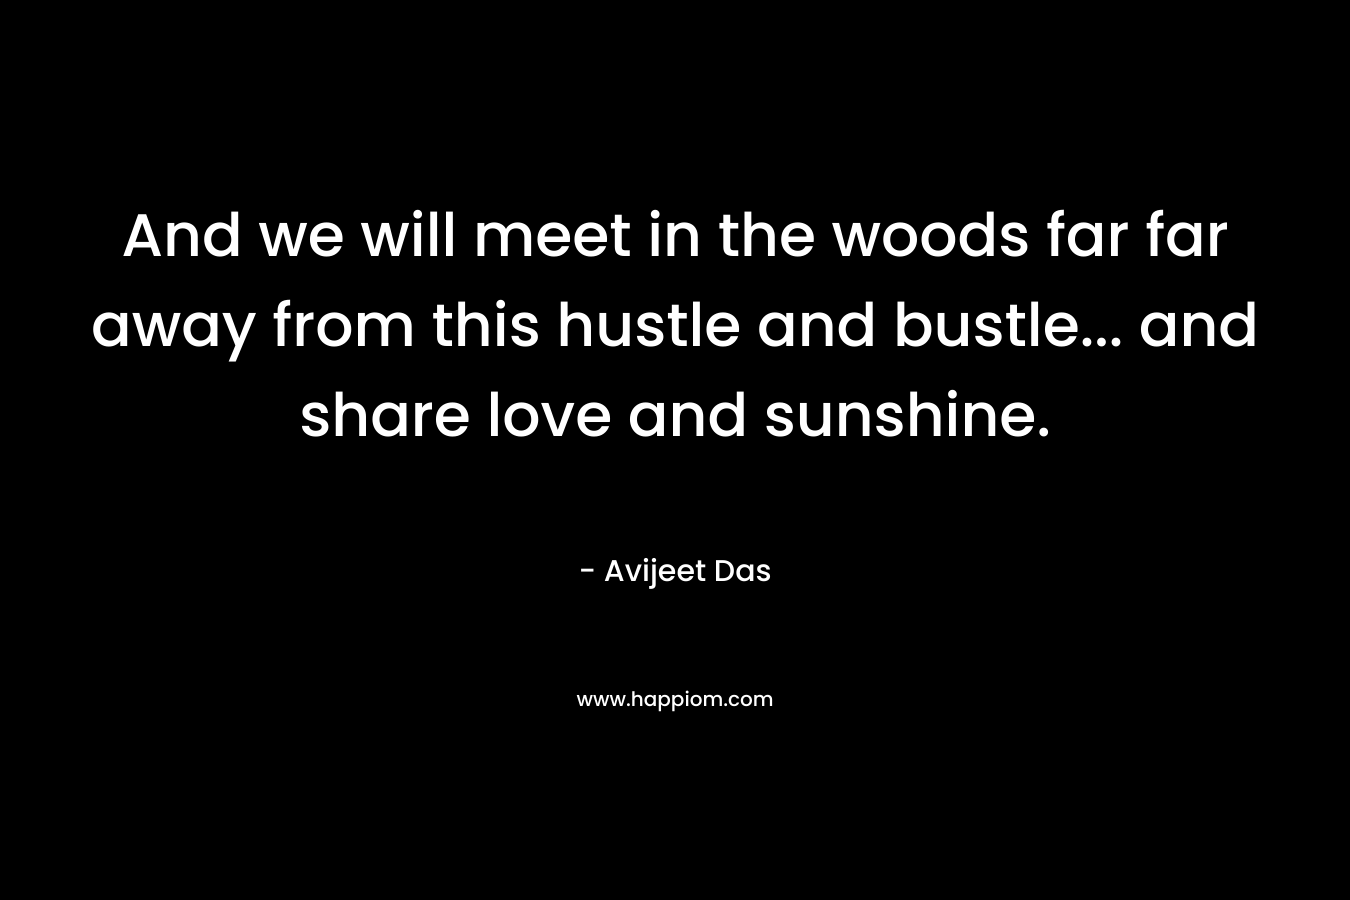 And we will meet in the woods far far away from this hustle and bustle... and share love and sunshine.